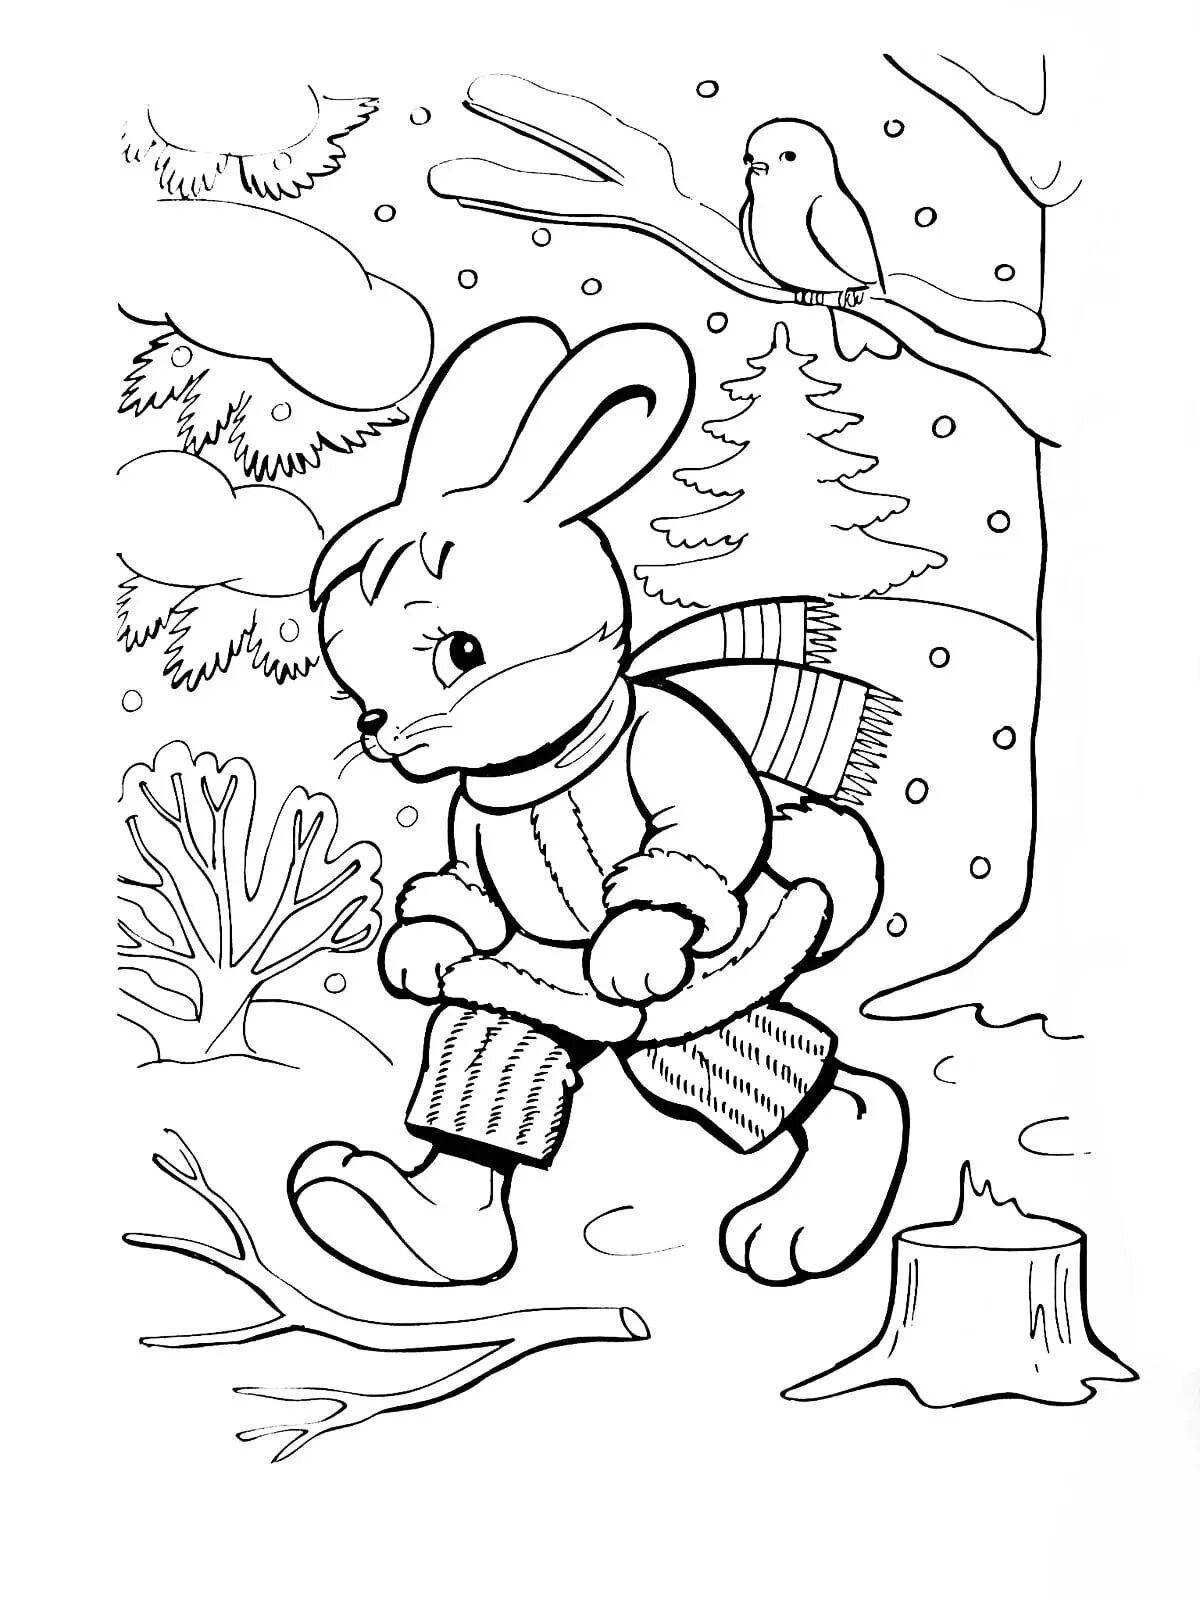 Coloring page magic hare bouncer